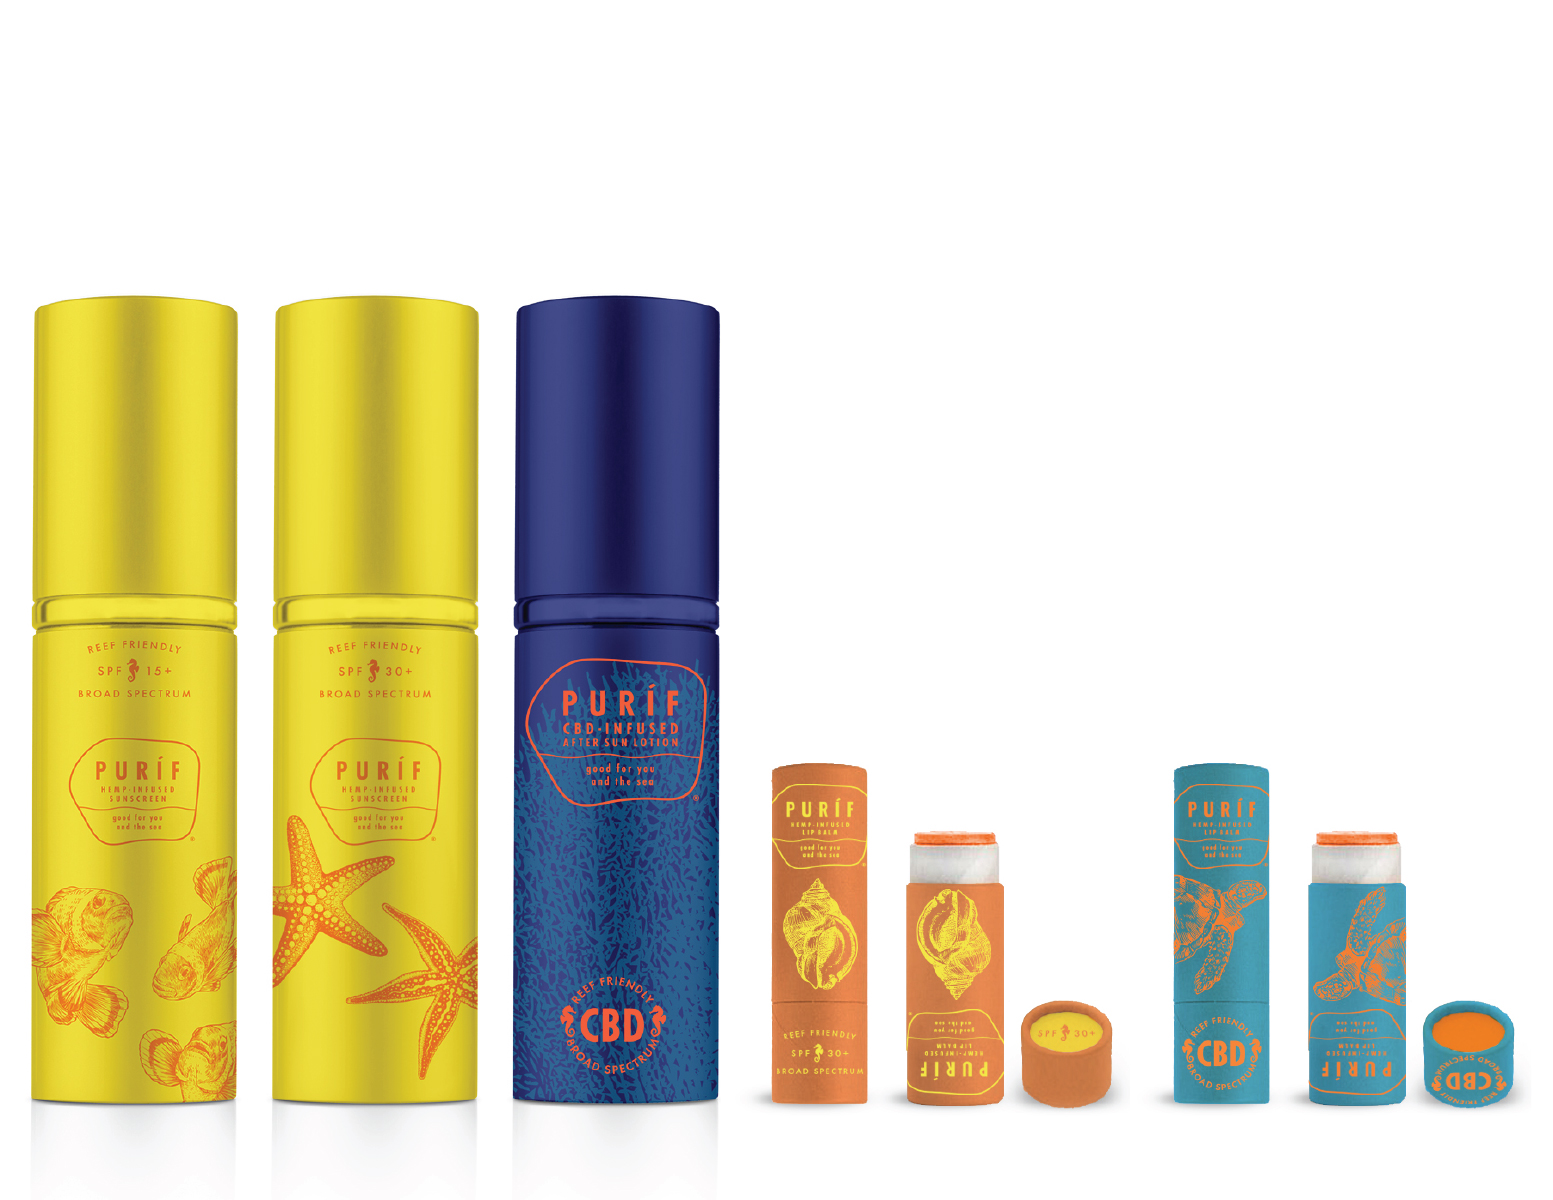 Purif package design